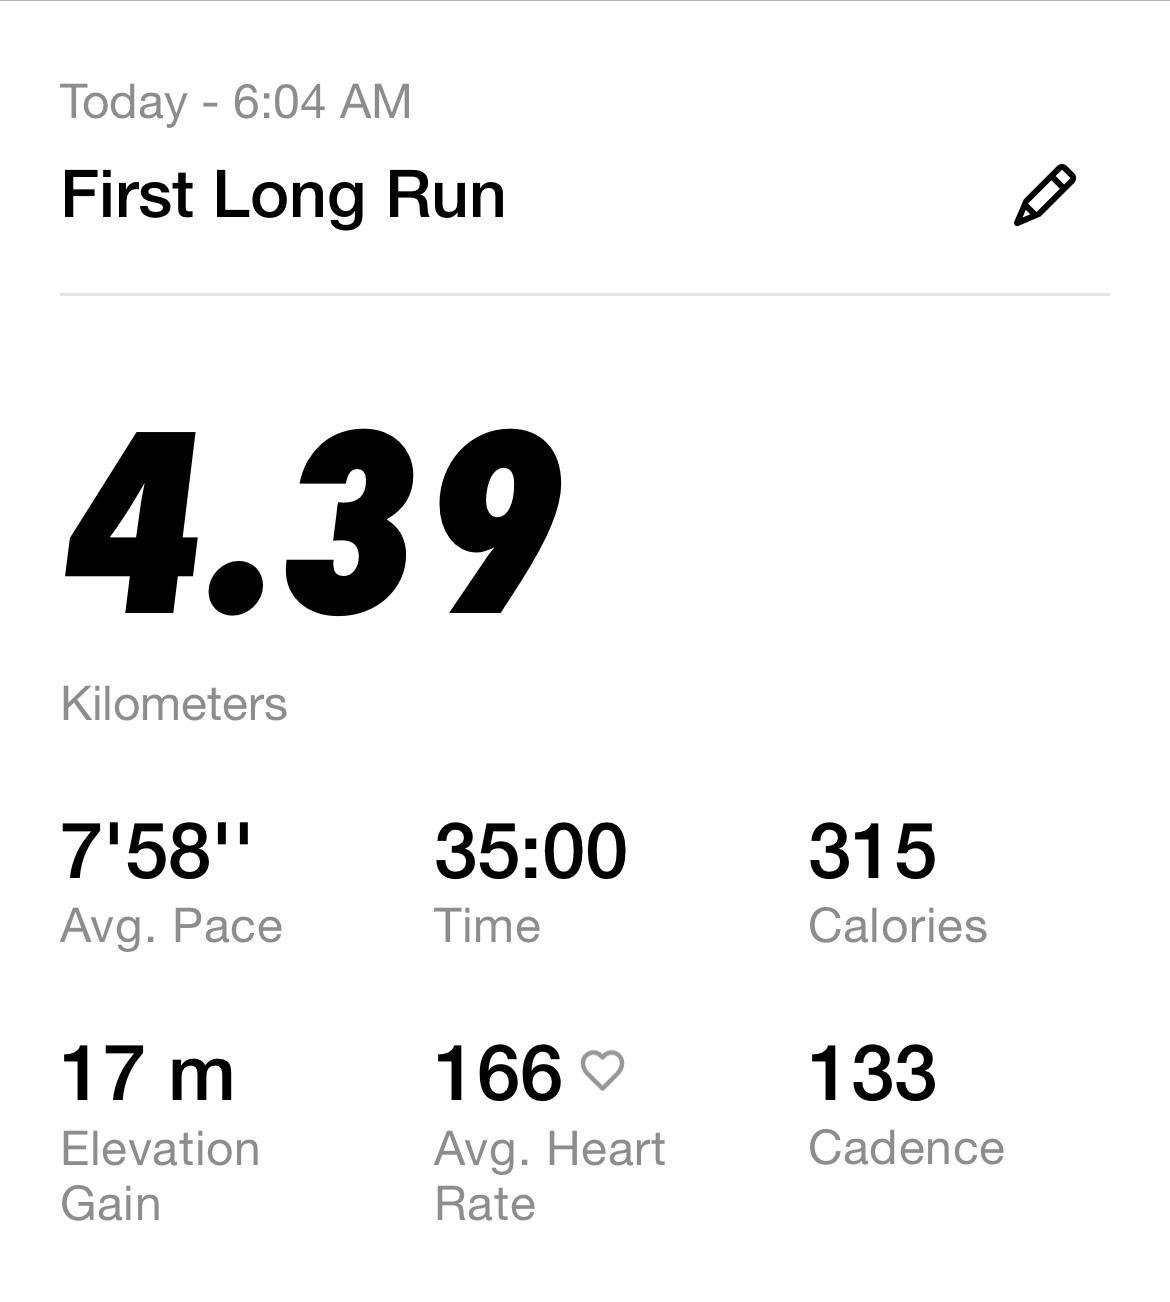 A screen capture from the Nike Run Club app showing statistics from a “First Long Run” workout. I ran 4.39km over 35 minutes at a pace of 7’58”.